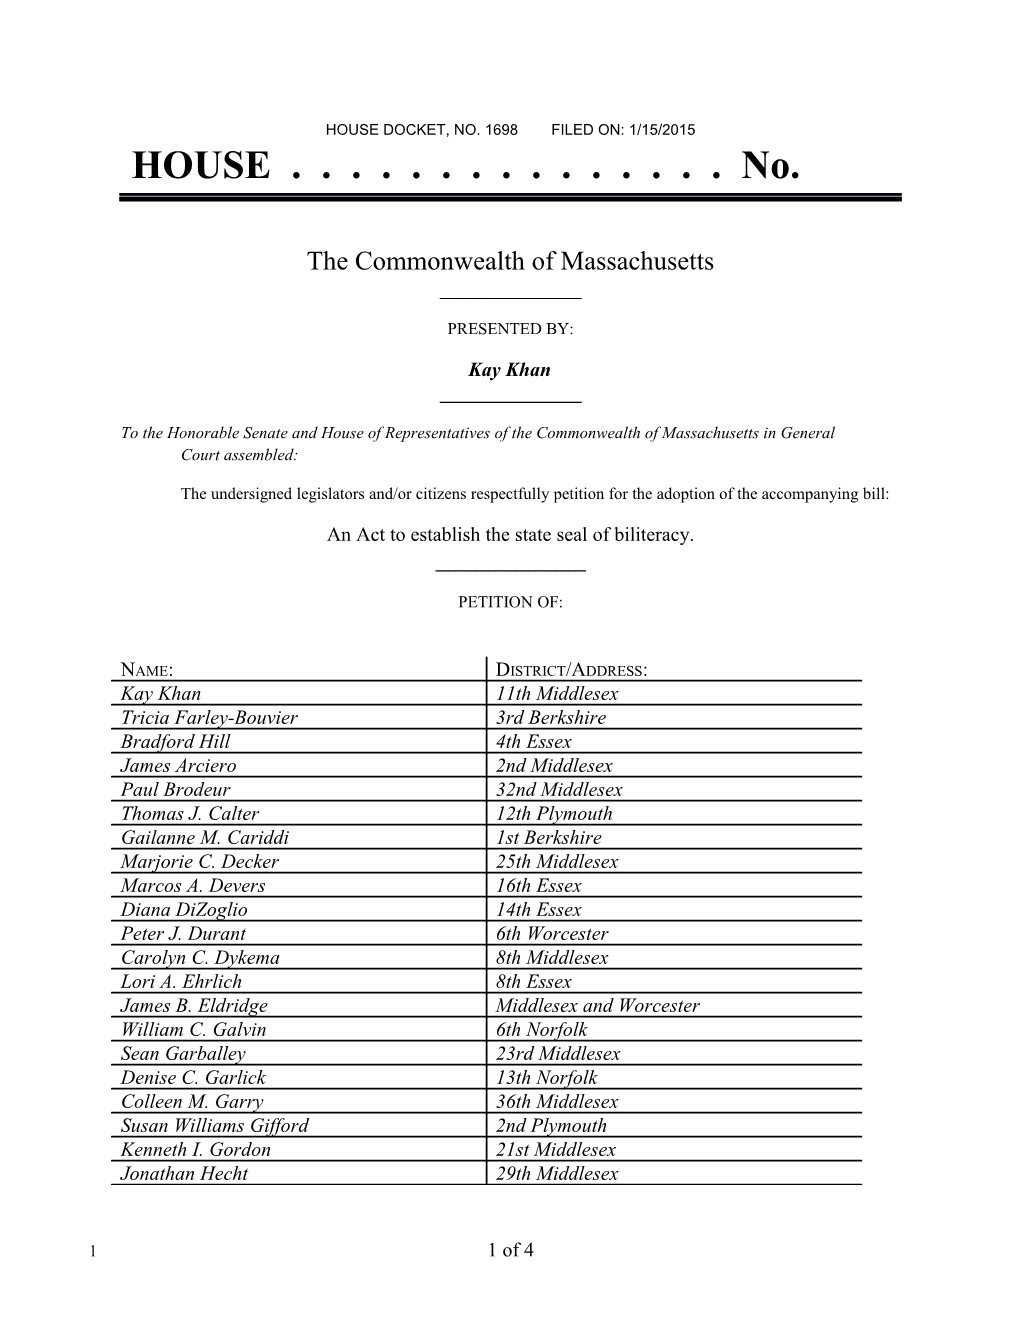 House Docket, No. 1698 Filed On: 1/15/2015